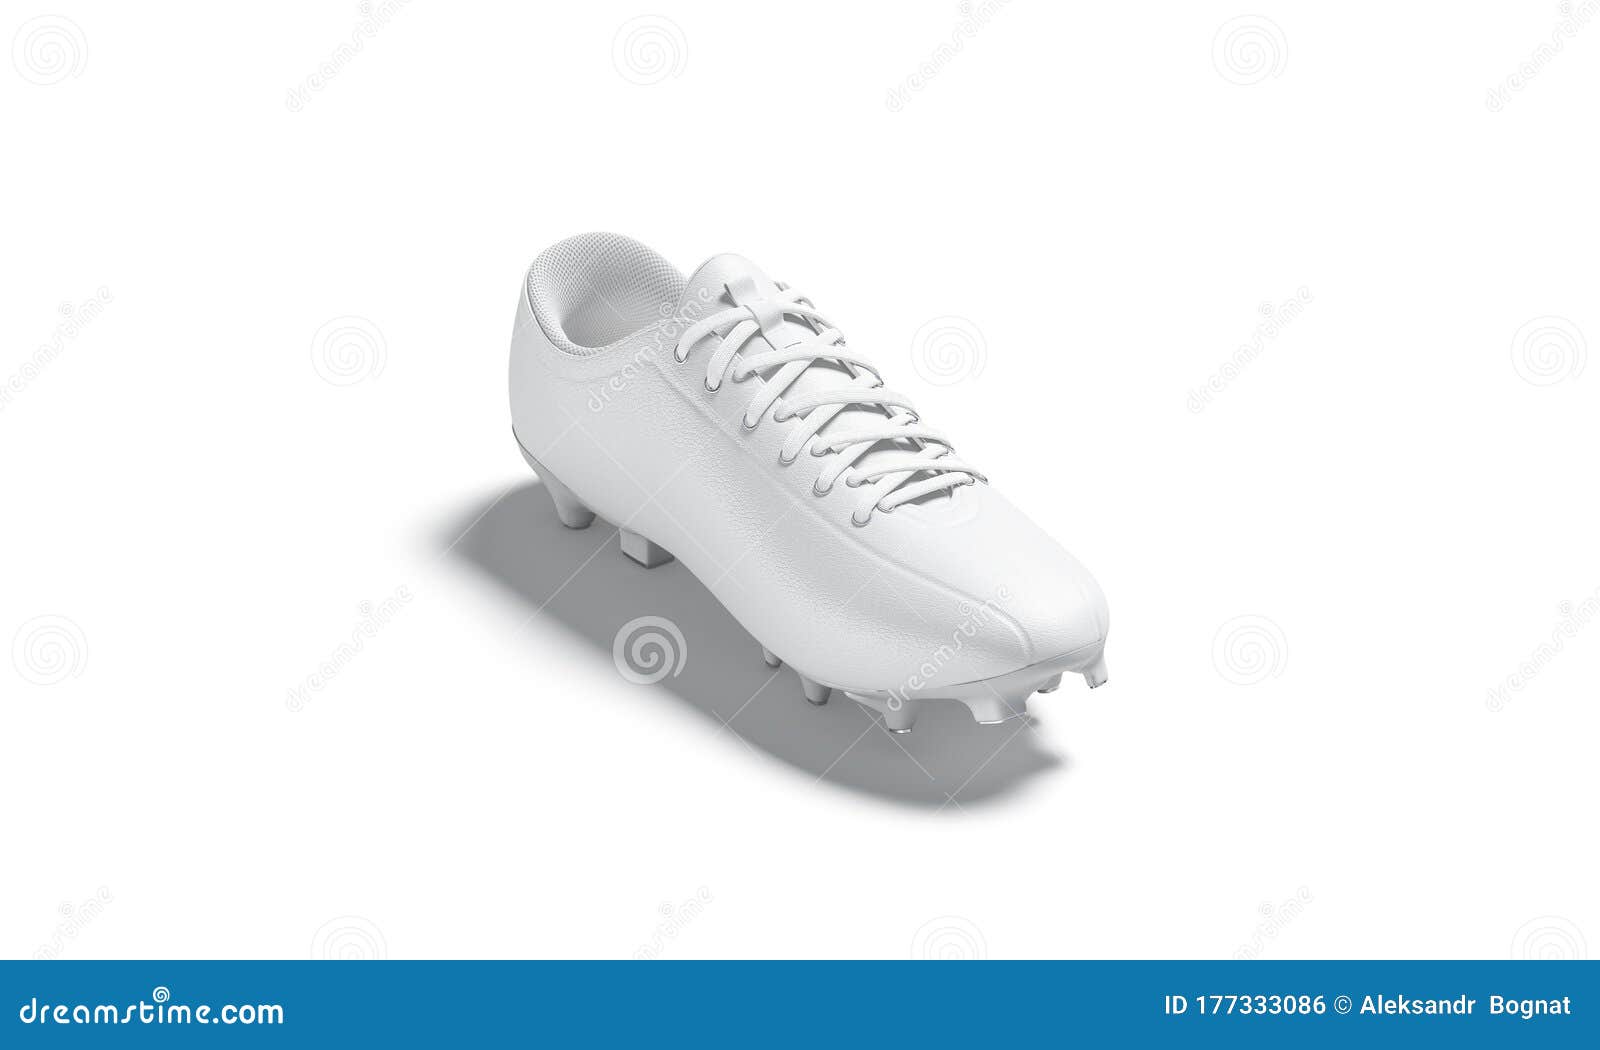 Download Blank White Soccer Boot With Rubber Cleats Mockup ...